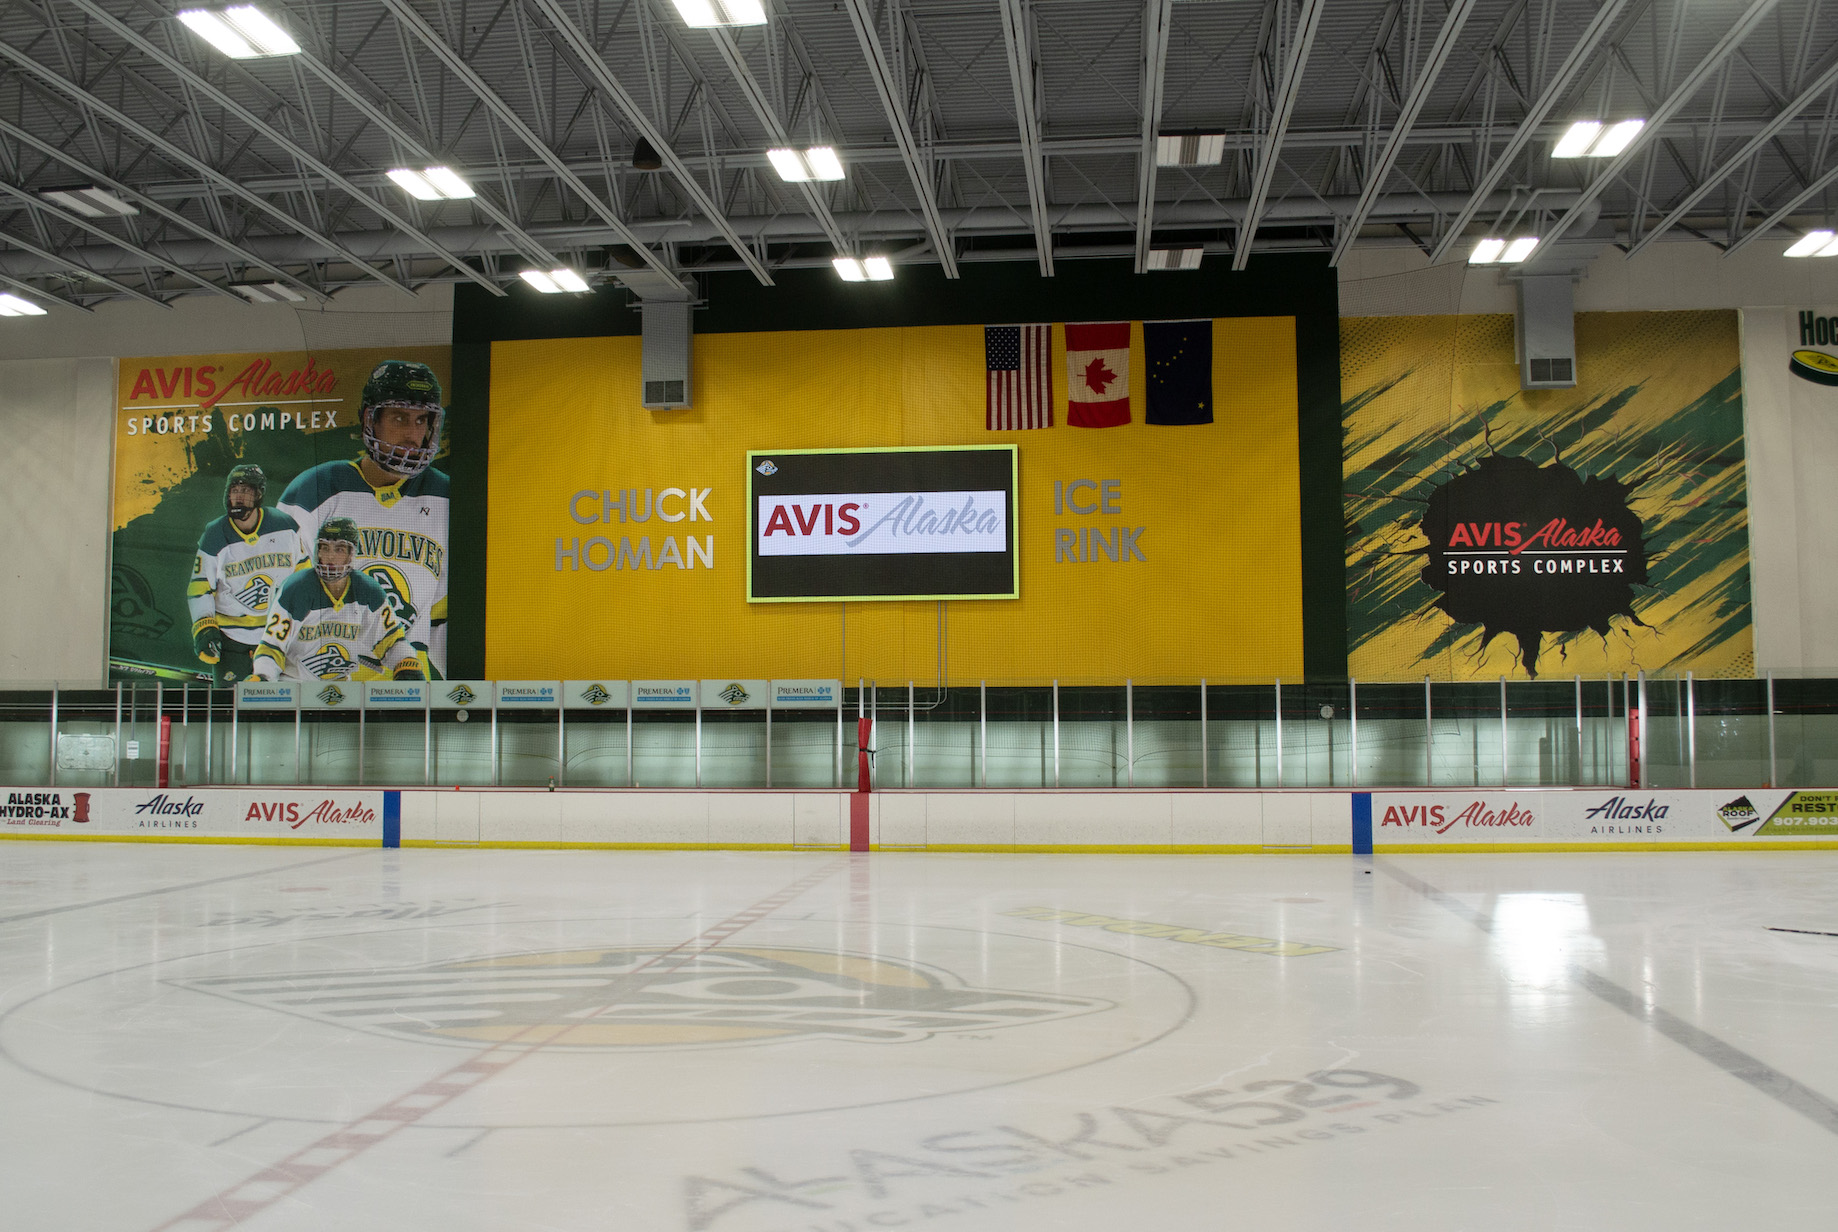 AASC Hockey Rink with 2 Large Format Prints. One print has a mural with 3 hockey players and the other mural has a design with Avis Alaska logo.